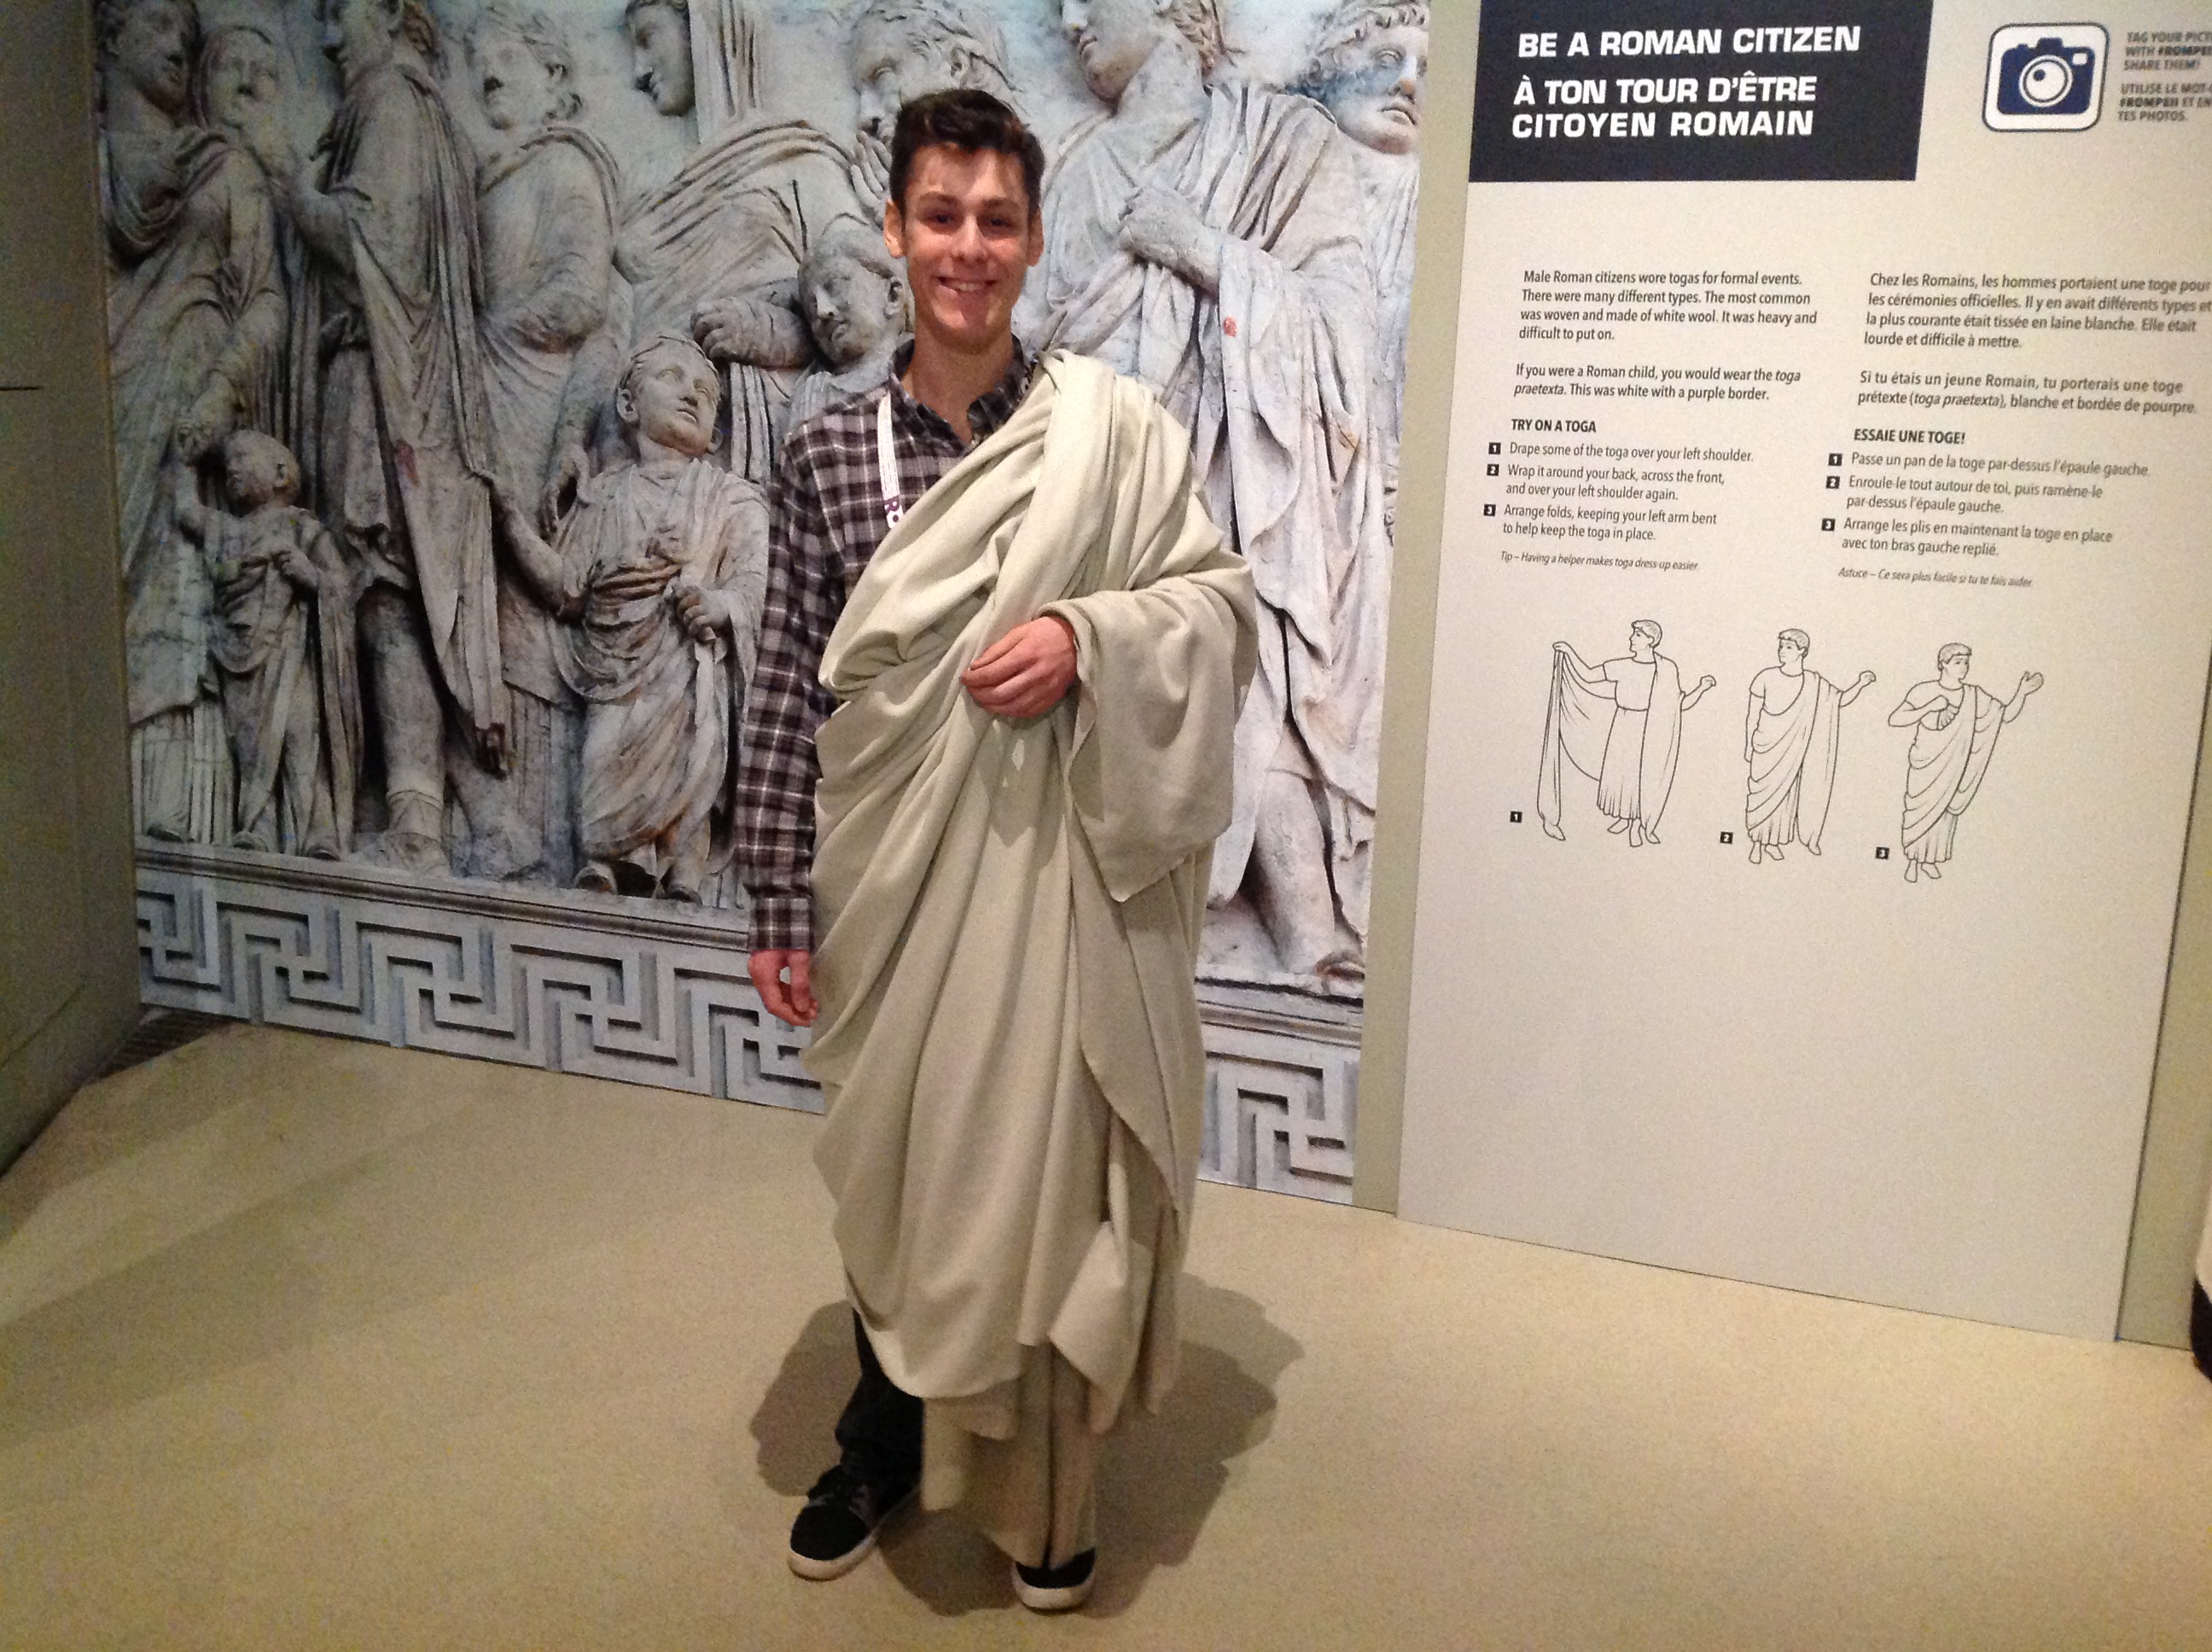 How To Wear A Toga The Ancient Roman Way Getty Iris | vlr.eng.br